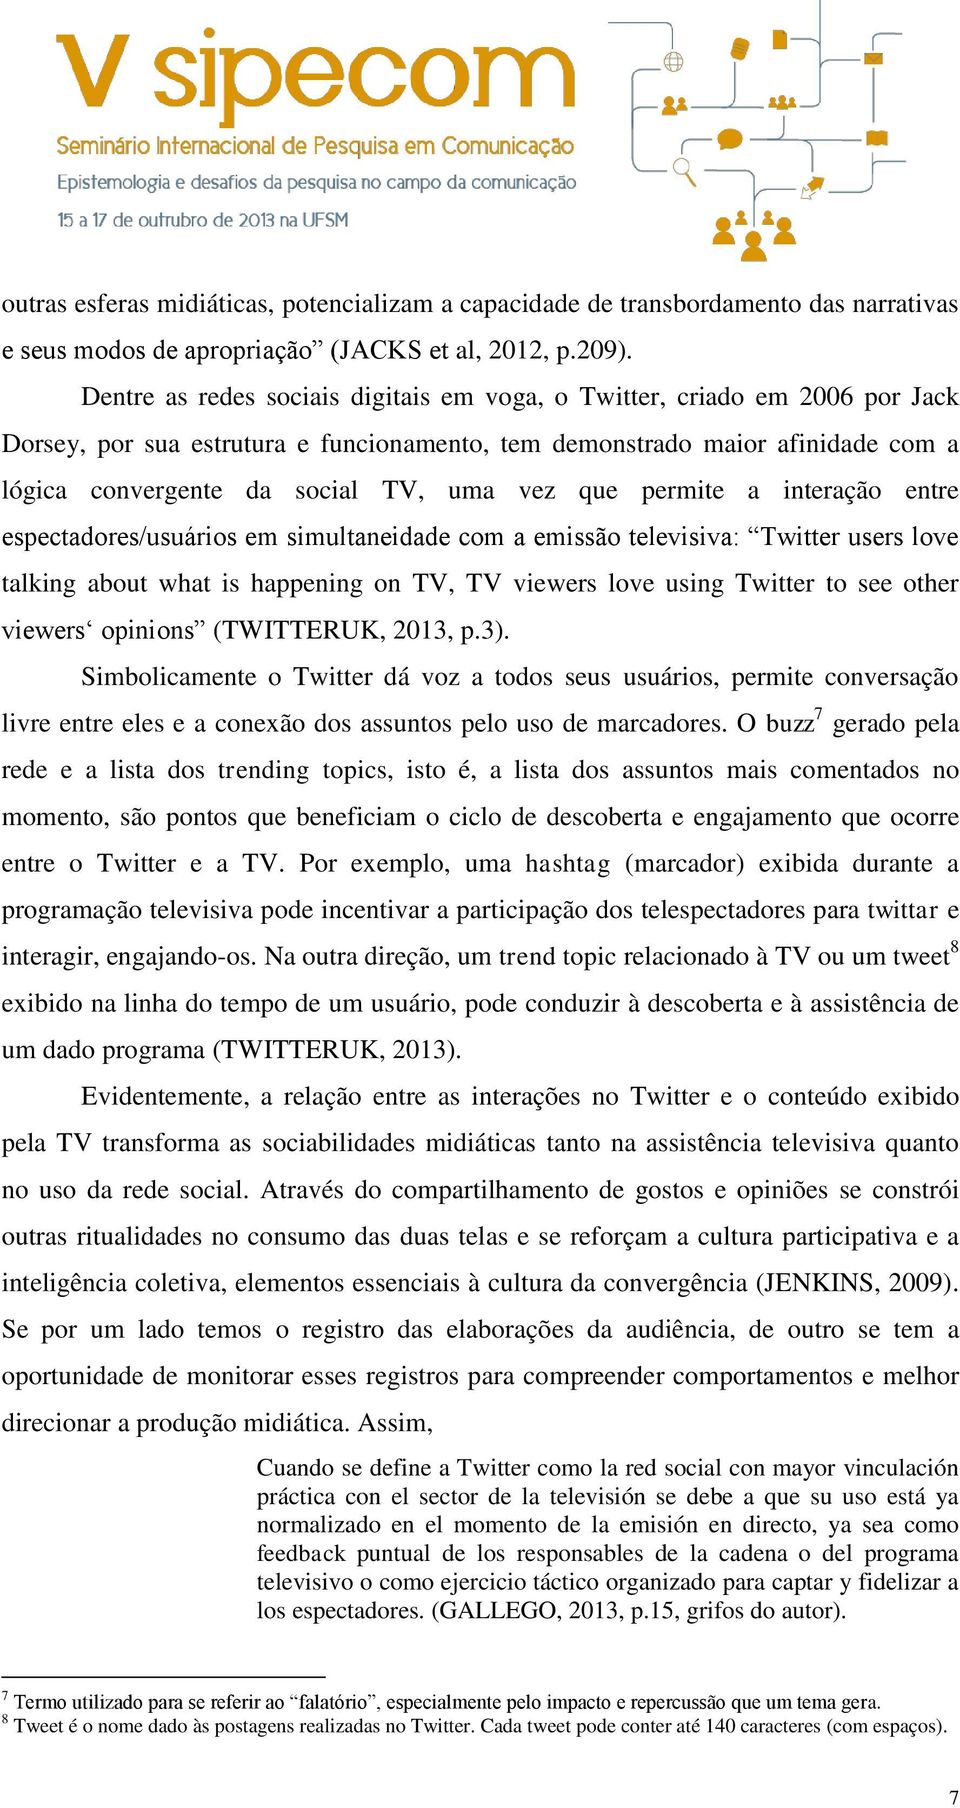 que permite a interação entre espectadores/usuários em simultaneidade com a emissão televisiva: Twitter users love talking about what is happening on TV, TV viewers love using Twitter to see other